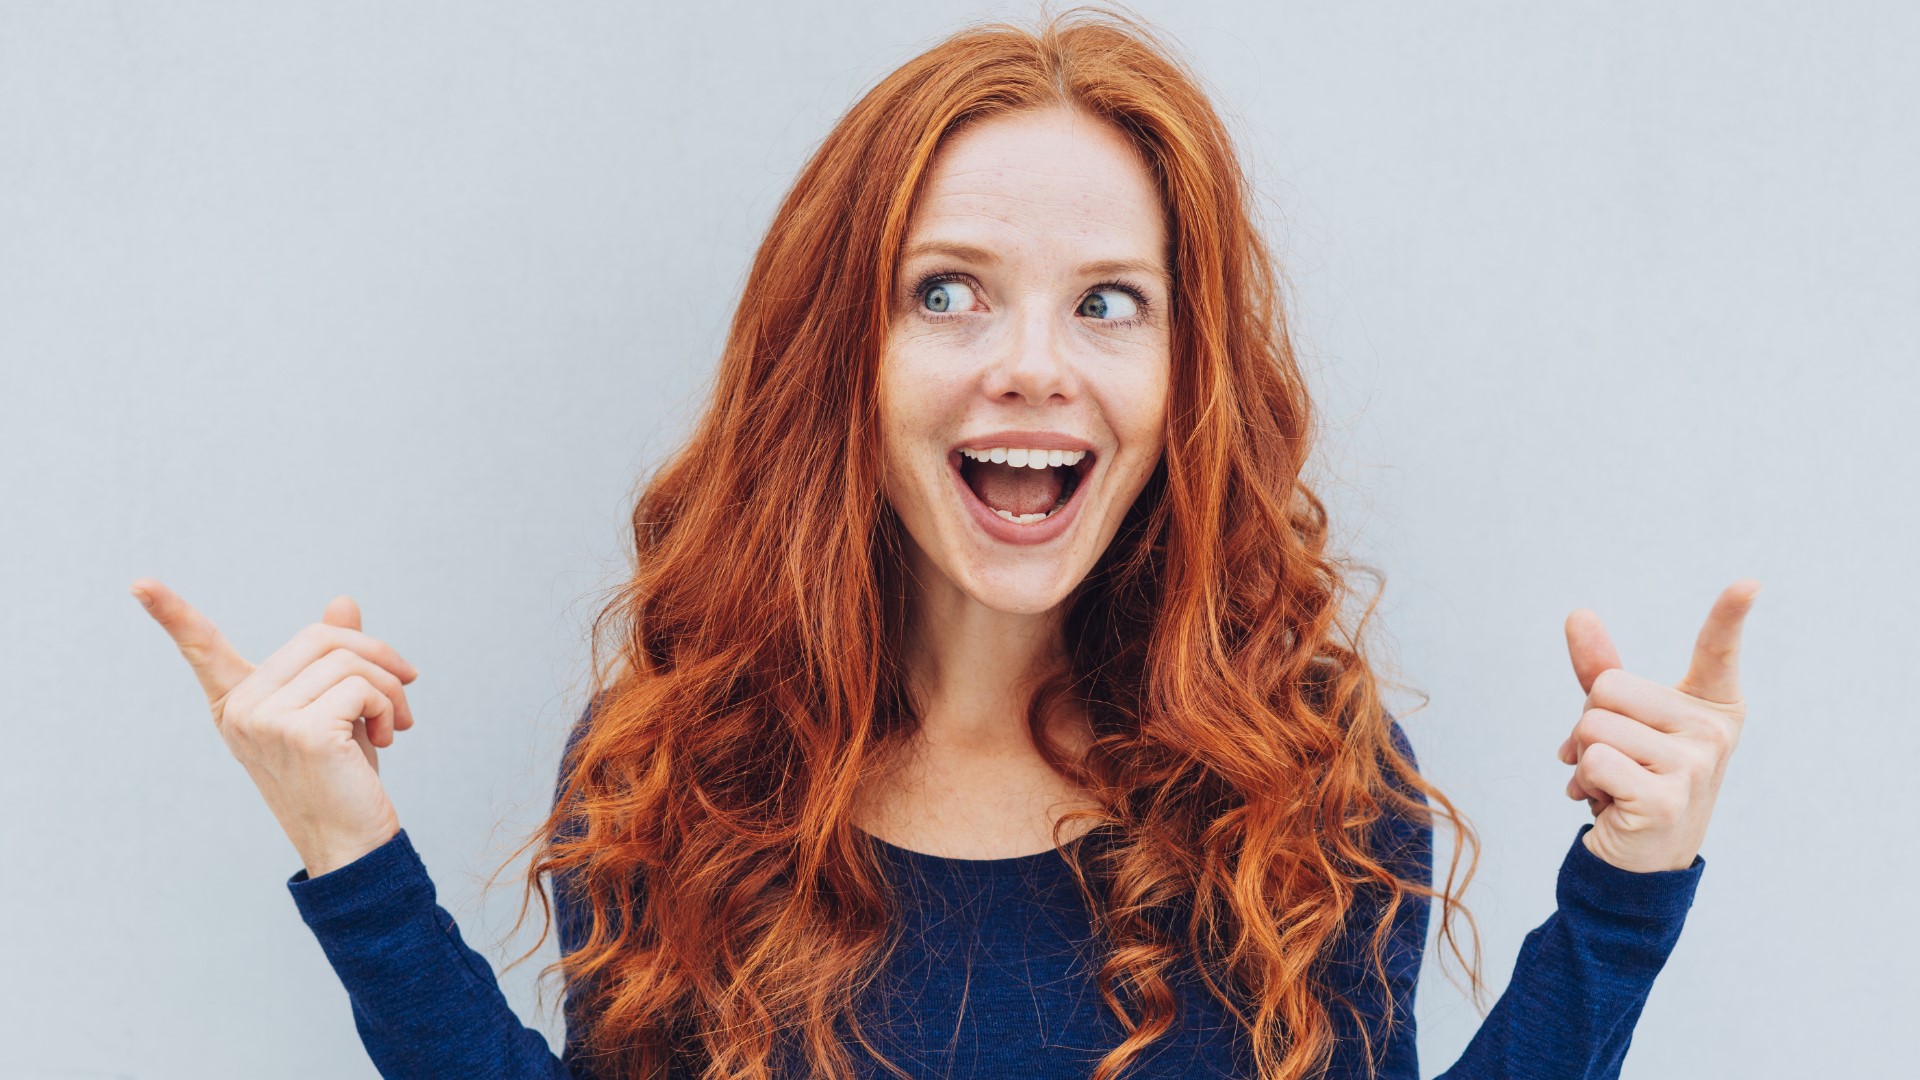 National Red Hair Day is November 5. Here are some facts you may not know about redheads.